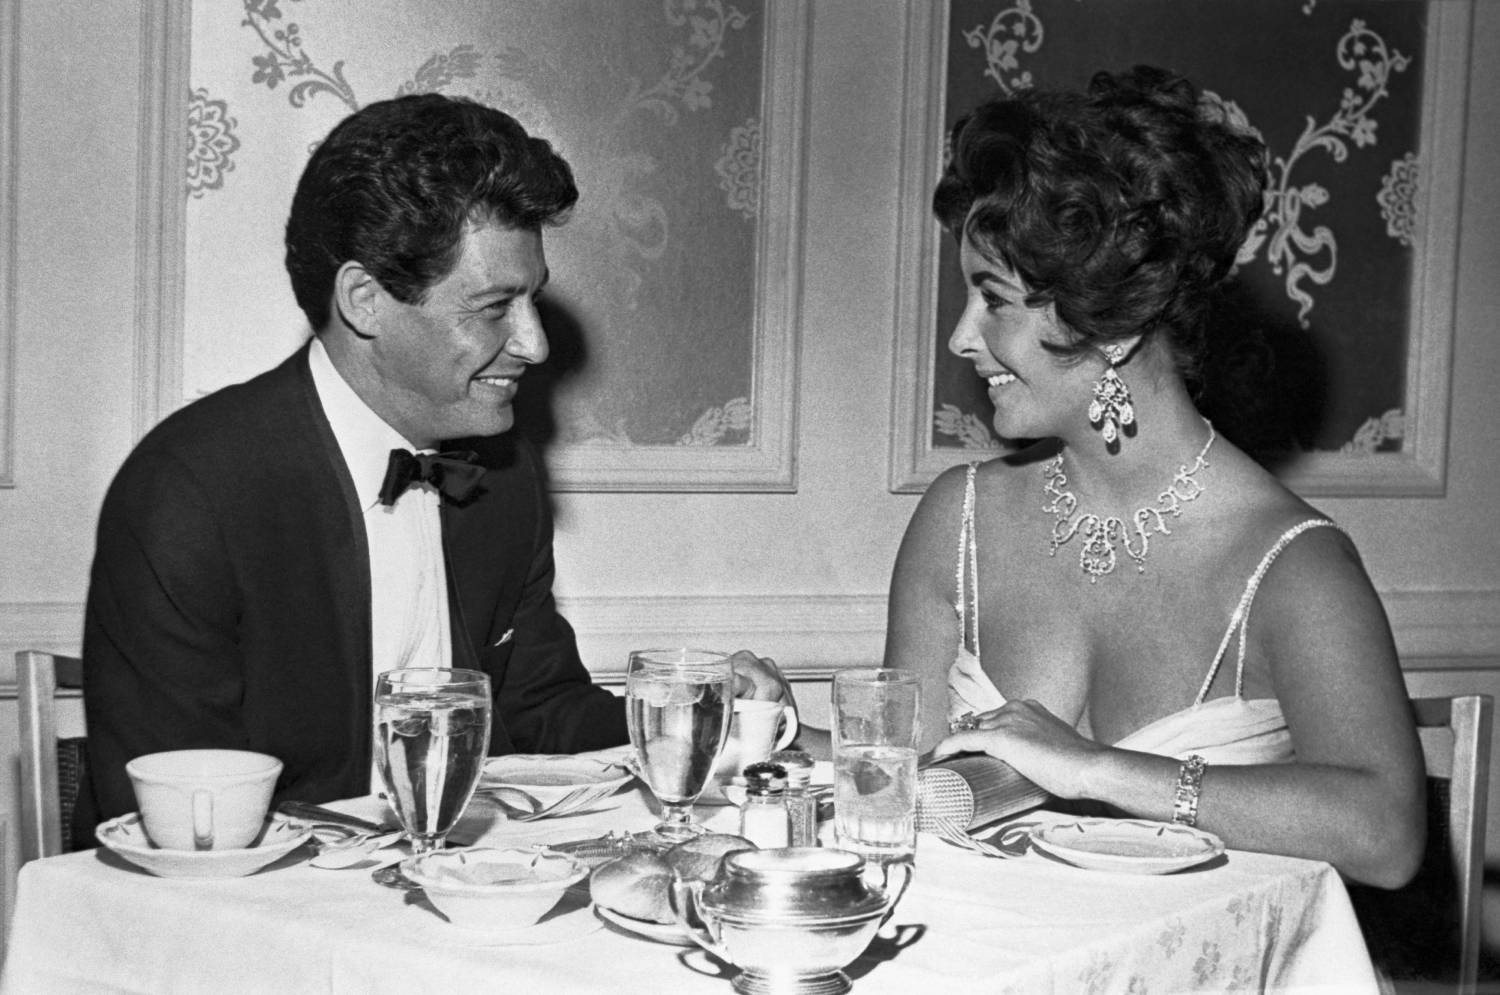  Crooner Eddie Fisher and betrothed actress Elizabeth Taylor huddle over last minute plans for their Las Vegas wedding Tuesday, to follow his expected divorce from Debbie Reynolds in Las Vegas Monday. Fisher and Miss Taylor plan to be united in a simple civil ceremony at the spacious ranch where she has been staying during his appearance at the Hotel Tropicana.